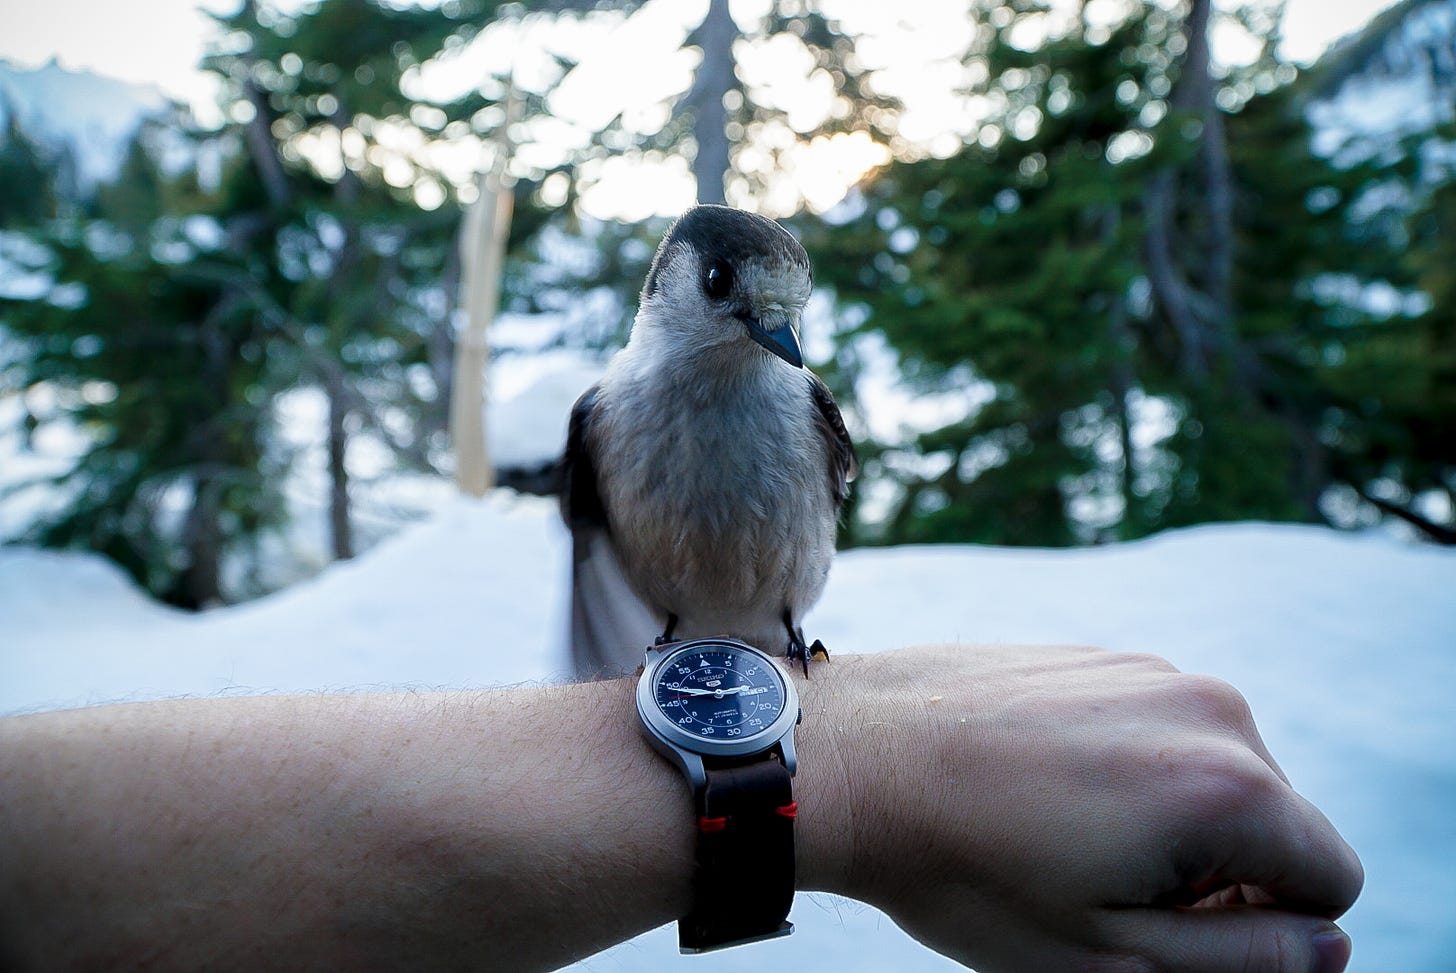 First Canada Jay wrist shot AJ took, blue seiko watch on wrist with leather strap and bird sitting on it looking straight at camera